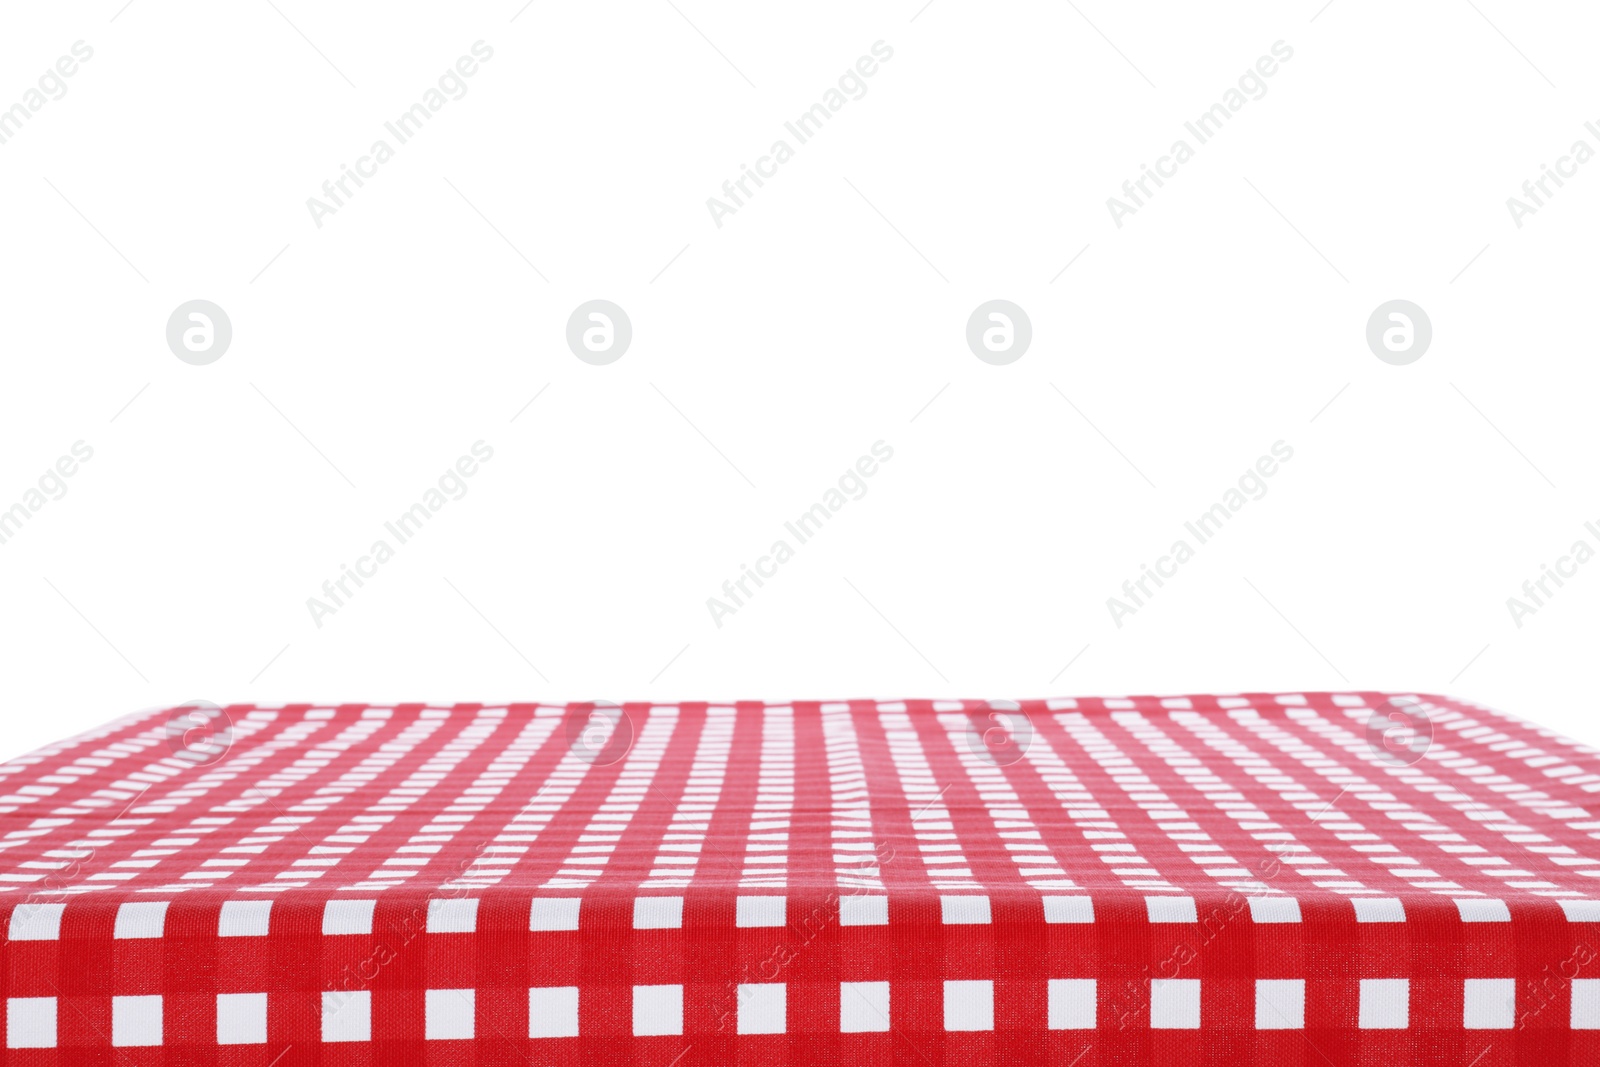 Photo of Table with red checkered tablecloth isolated on white